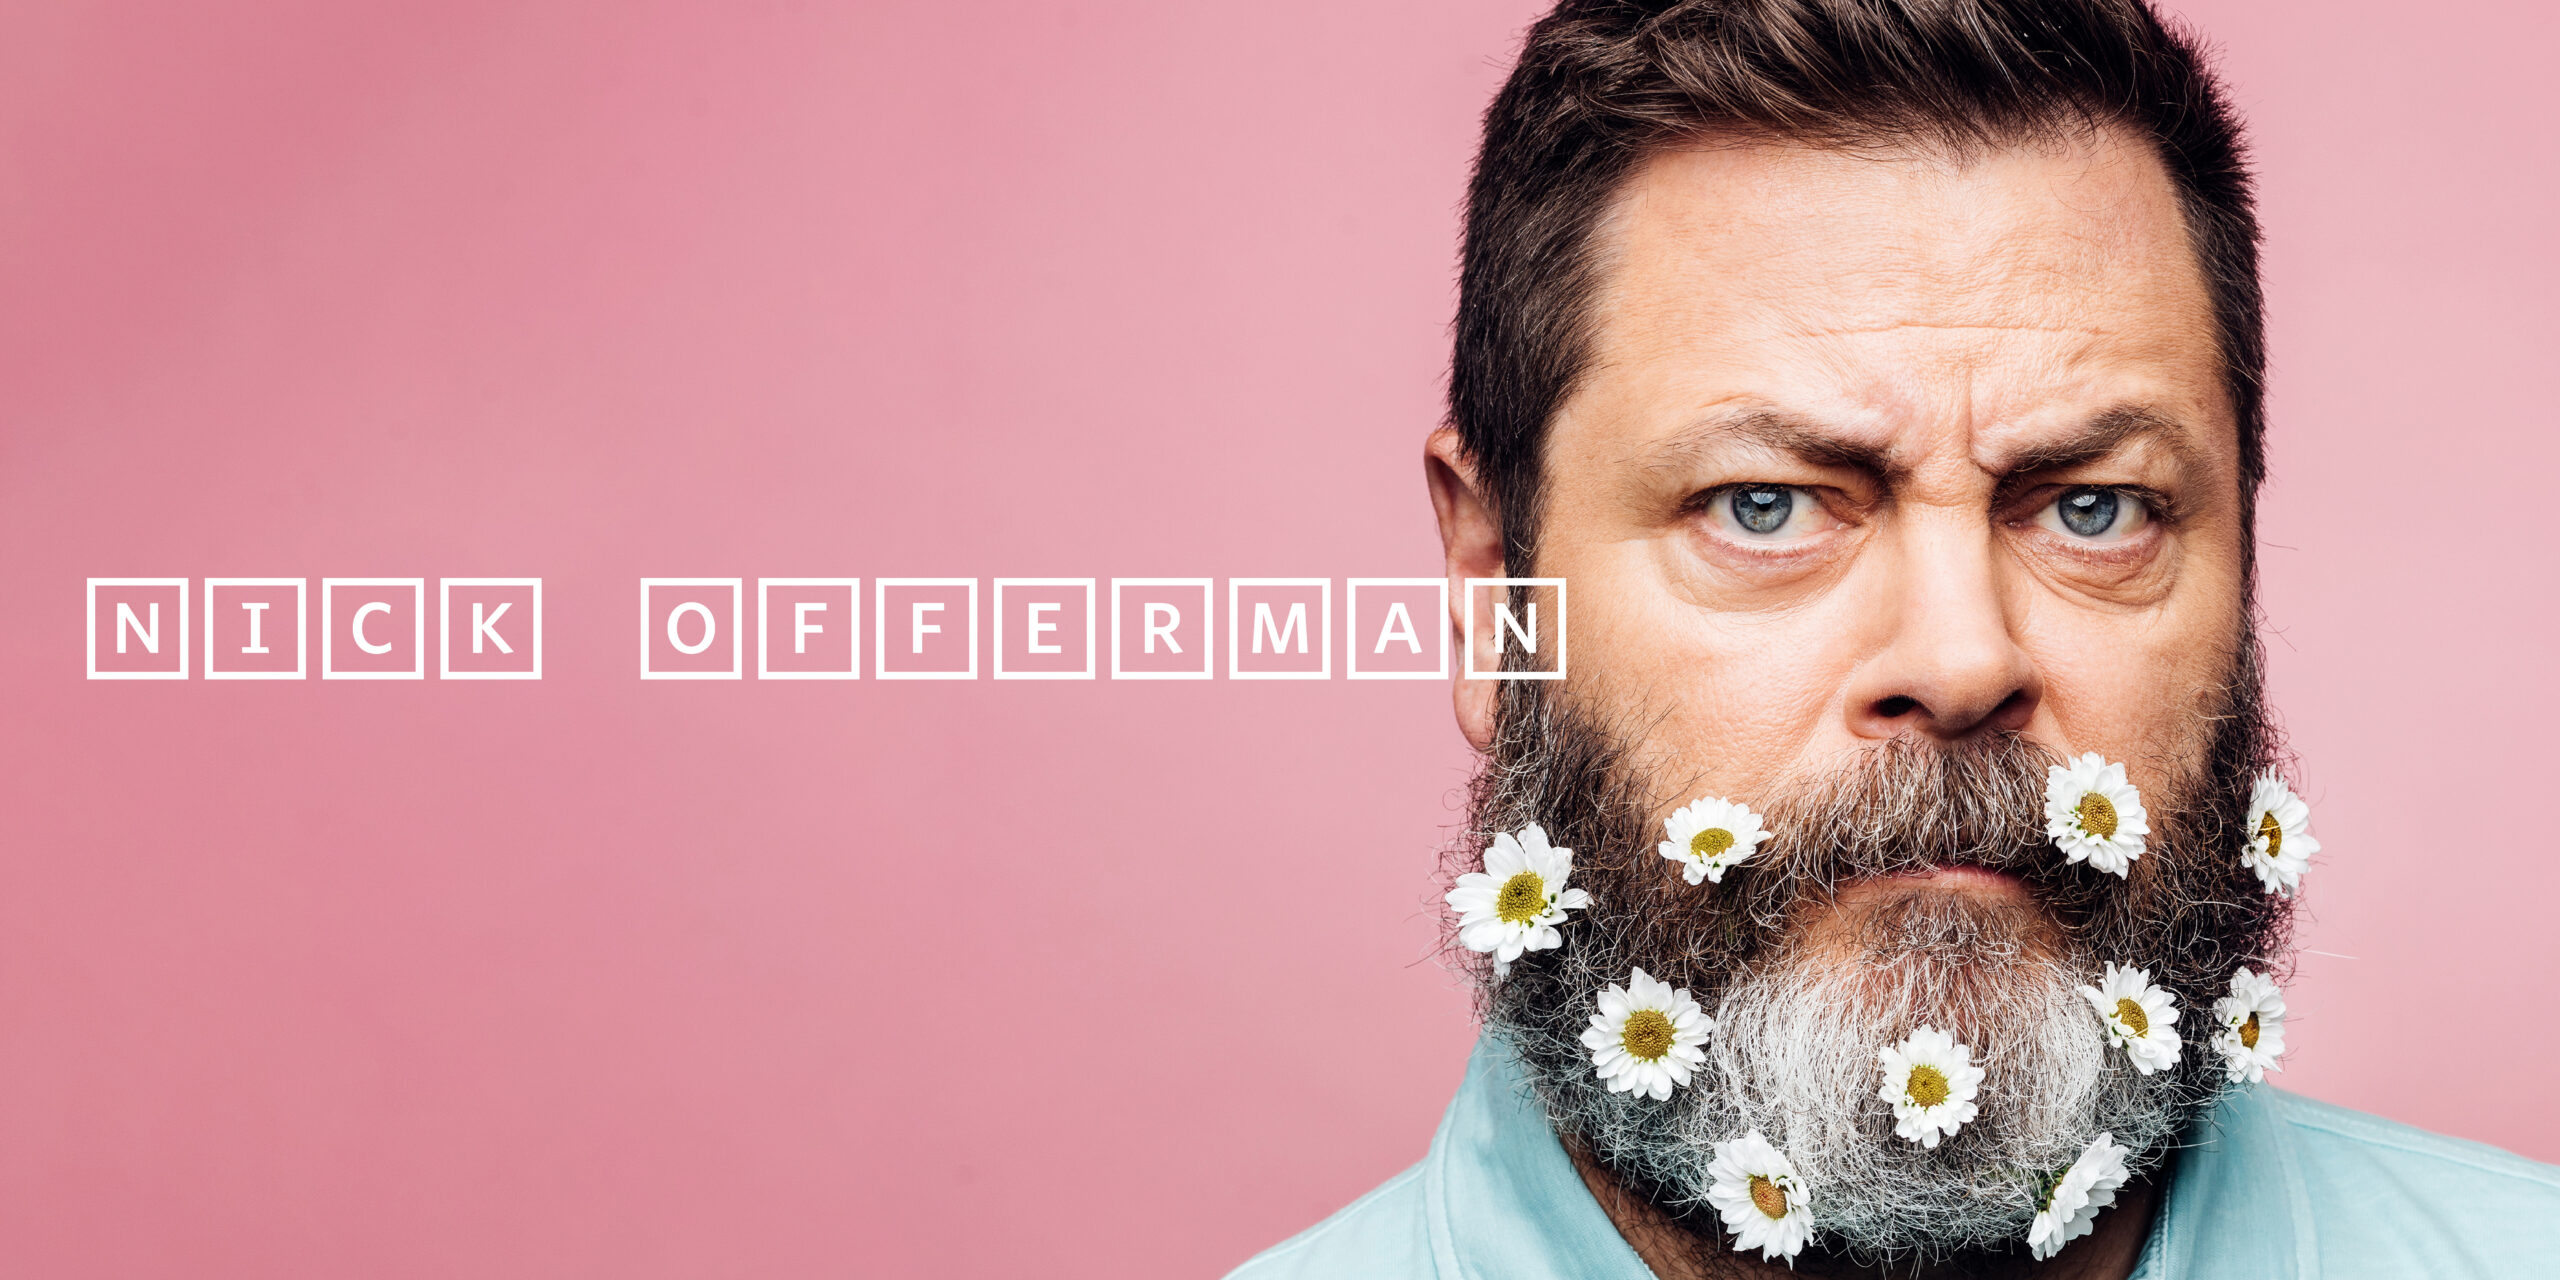 A headshot of Nick Offerman, a dark-haired man, with small, white flowers stuck into his graying beard sits on a pink backdrop.